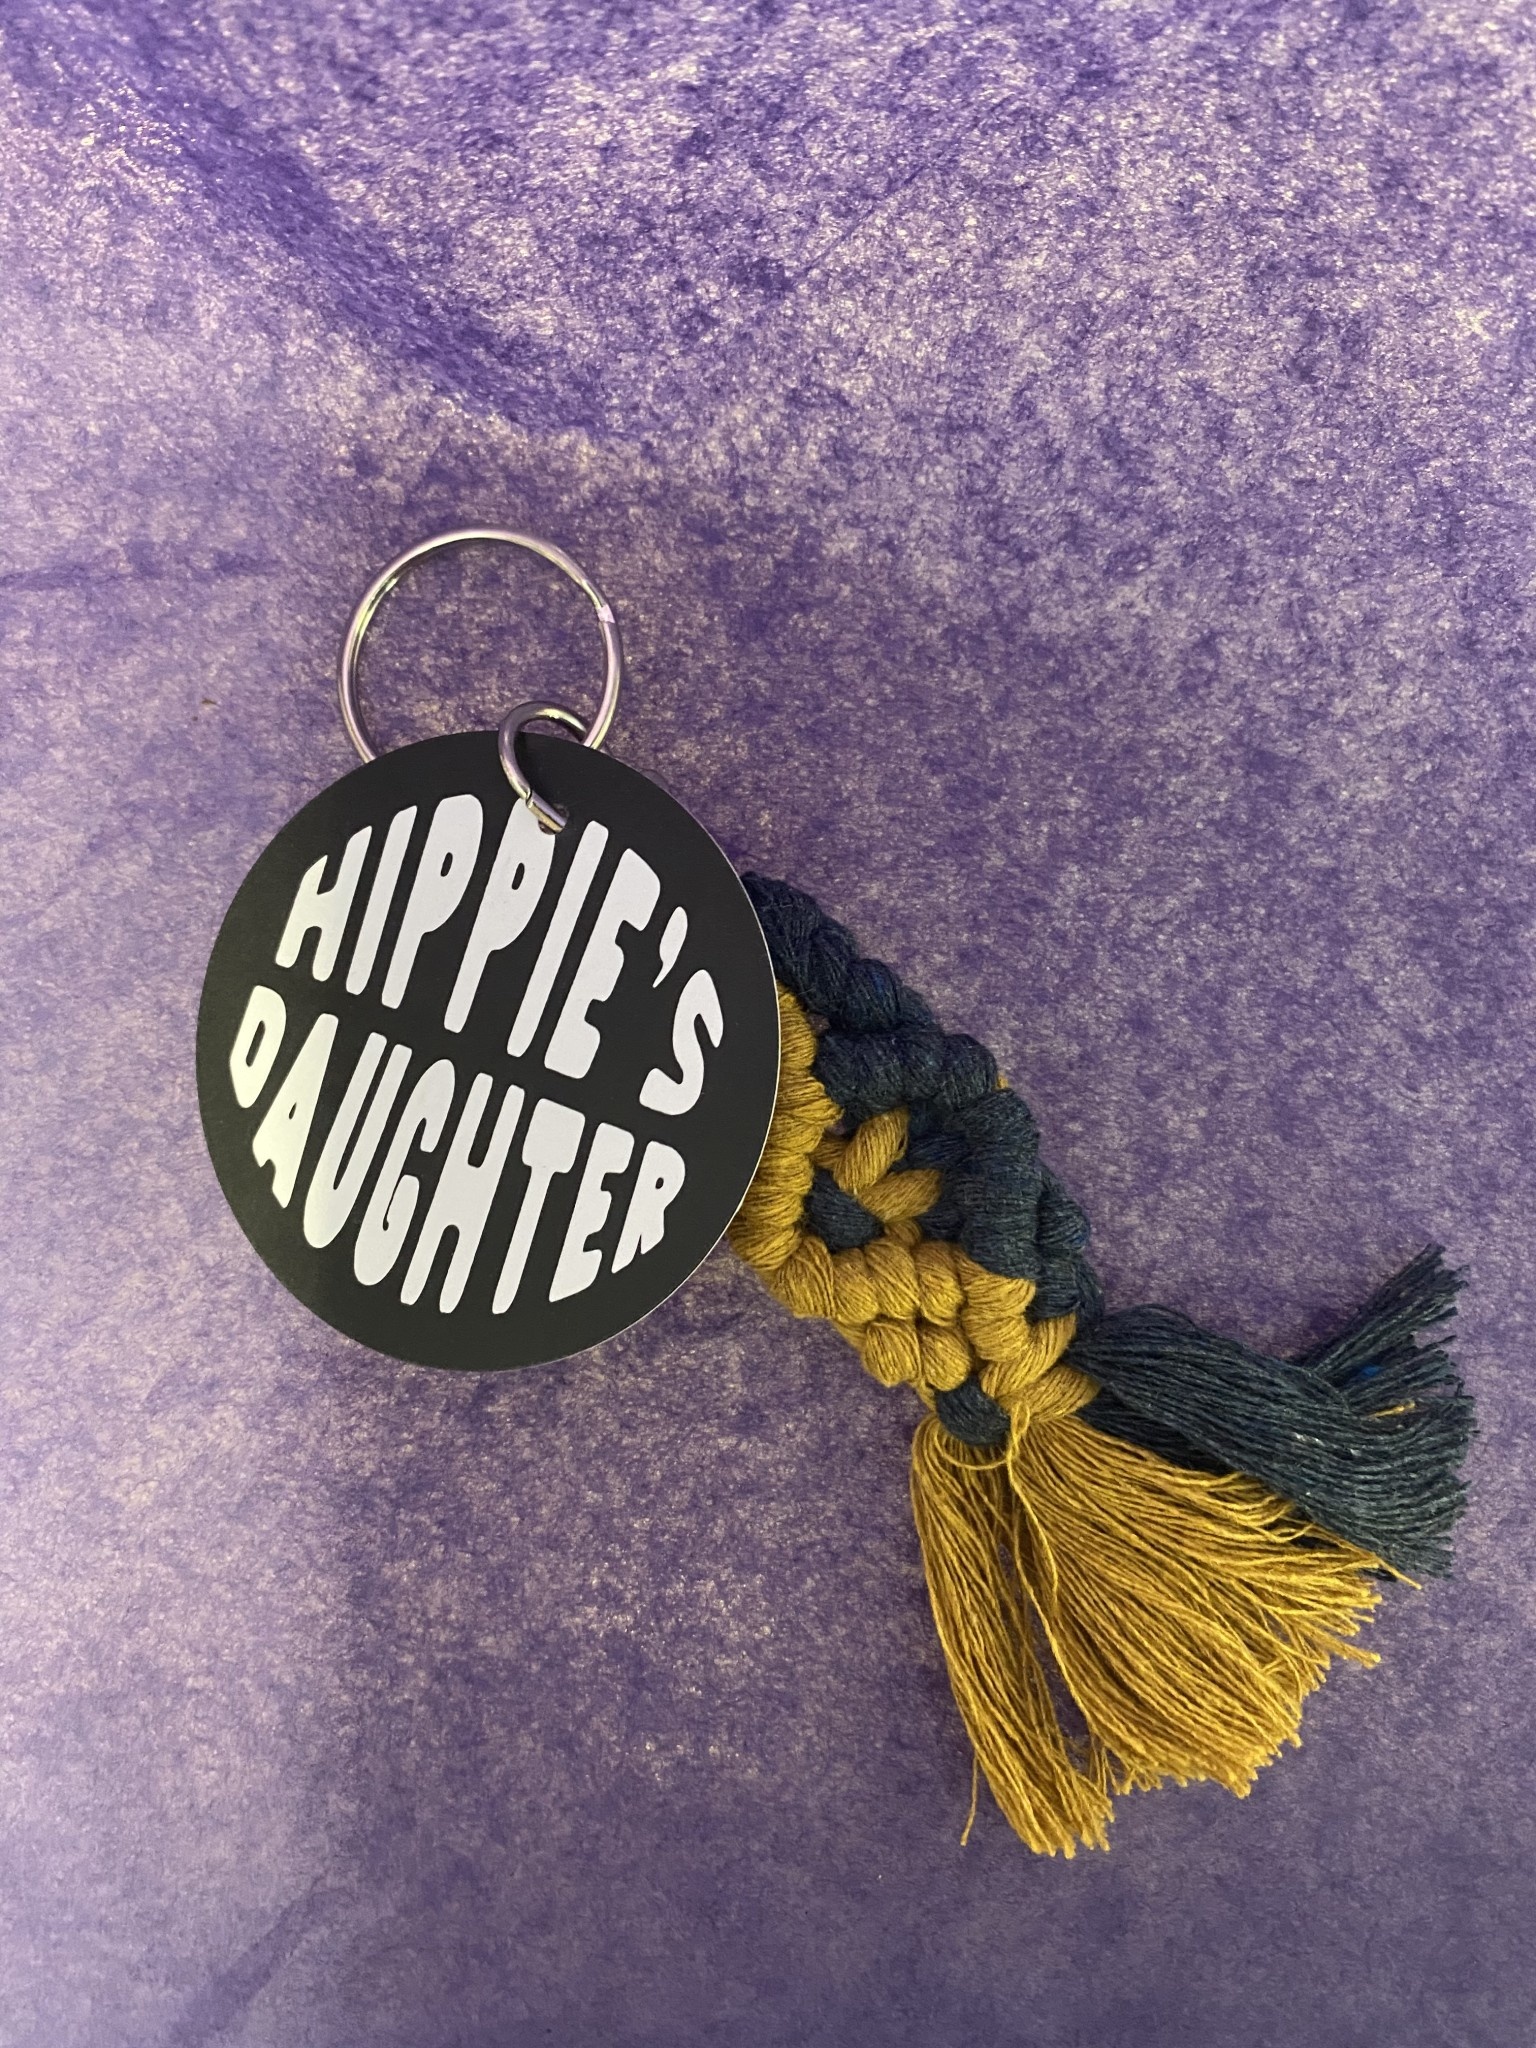 The Hippie's Daughter Mini Macrame Keychain WV Colors